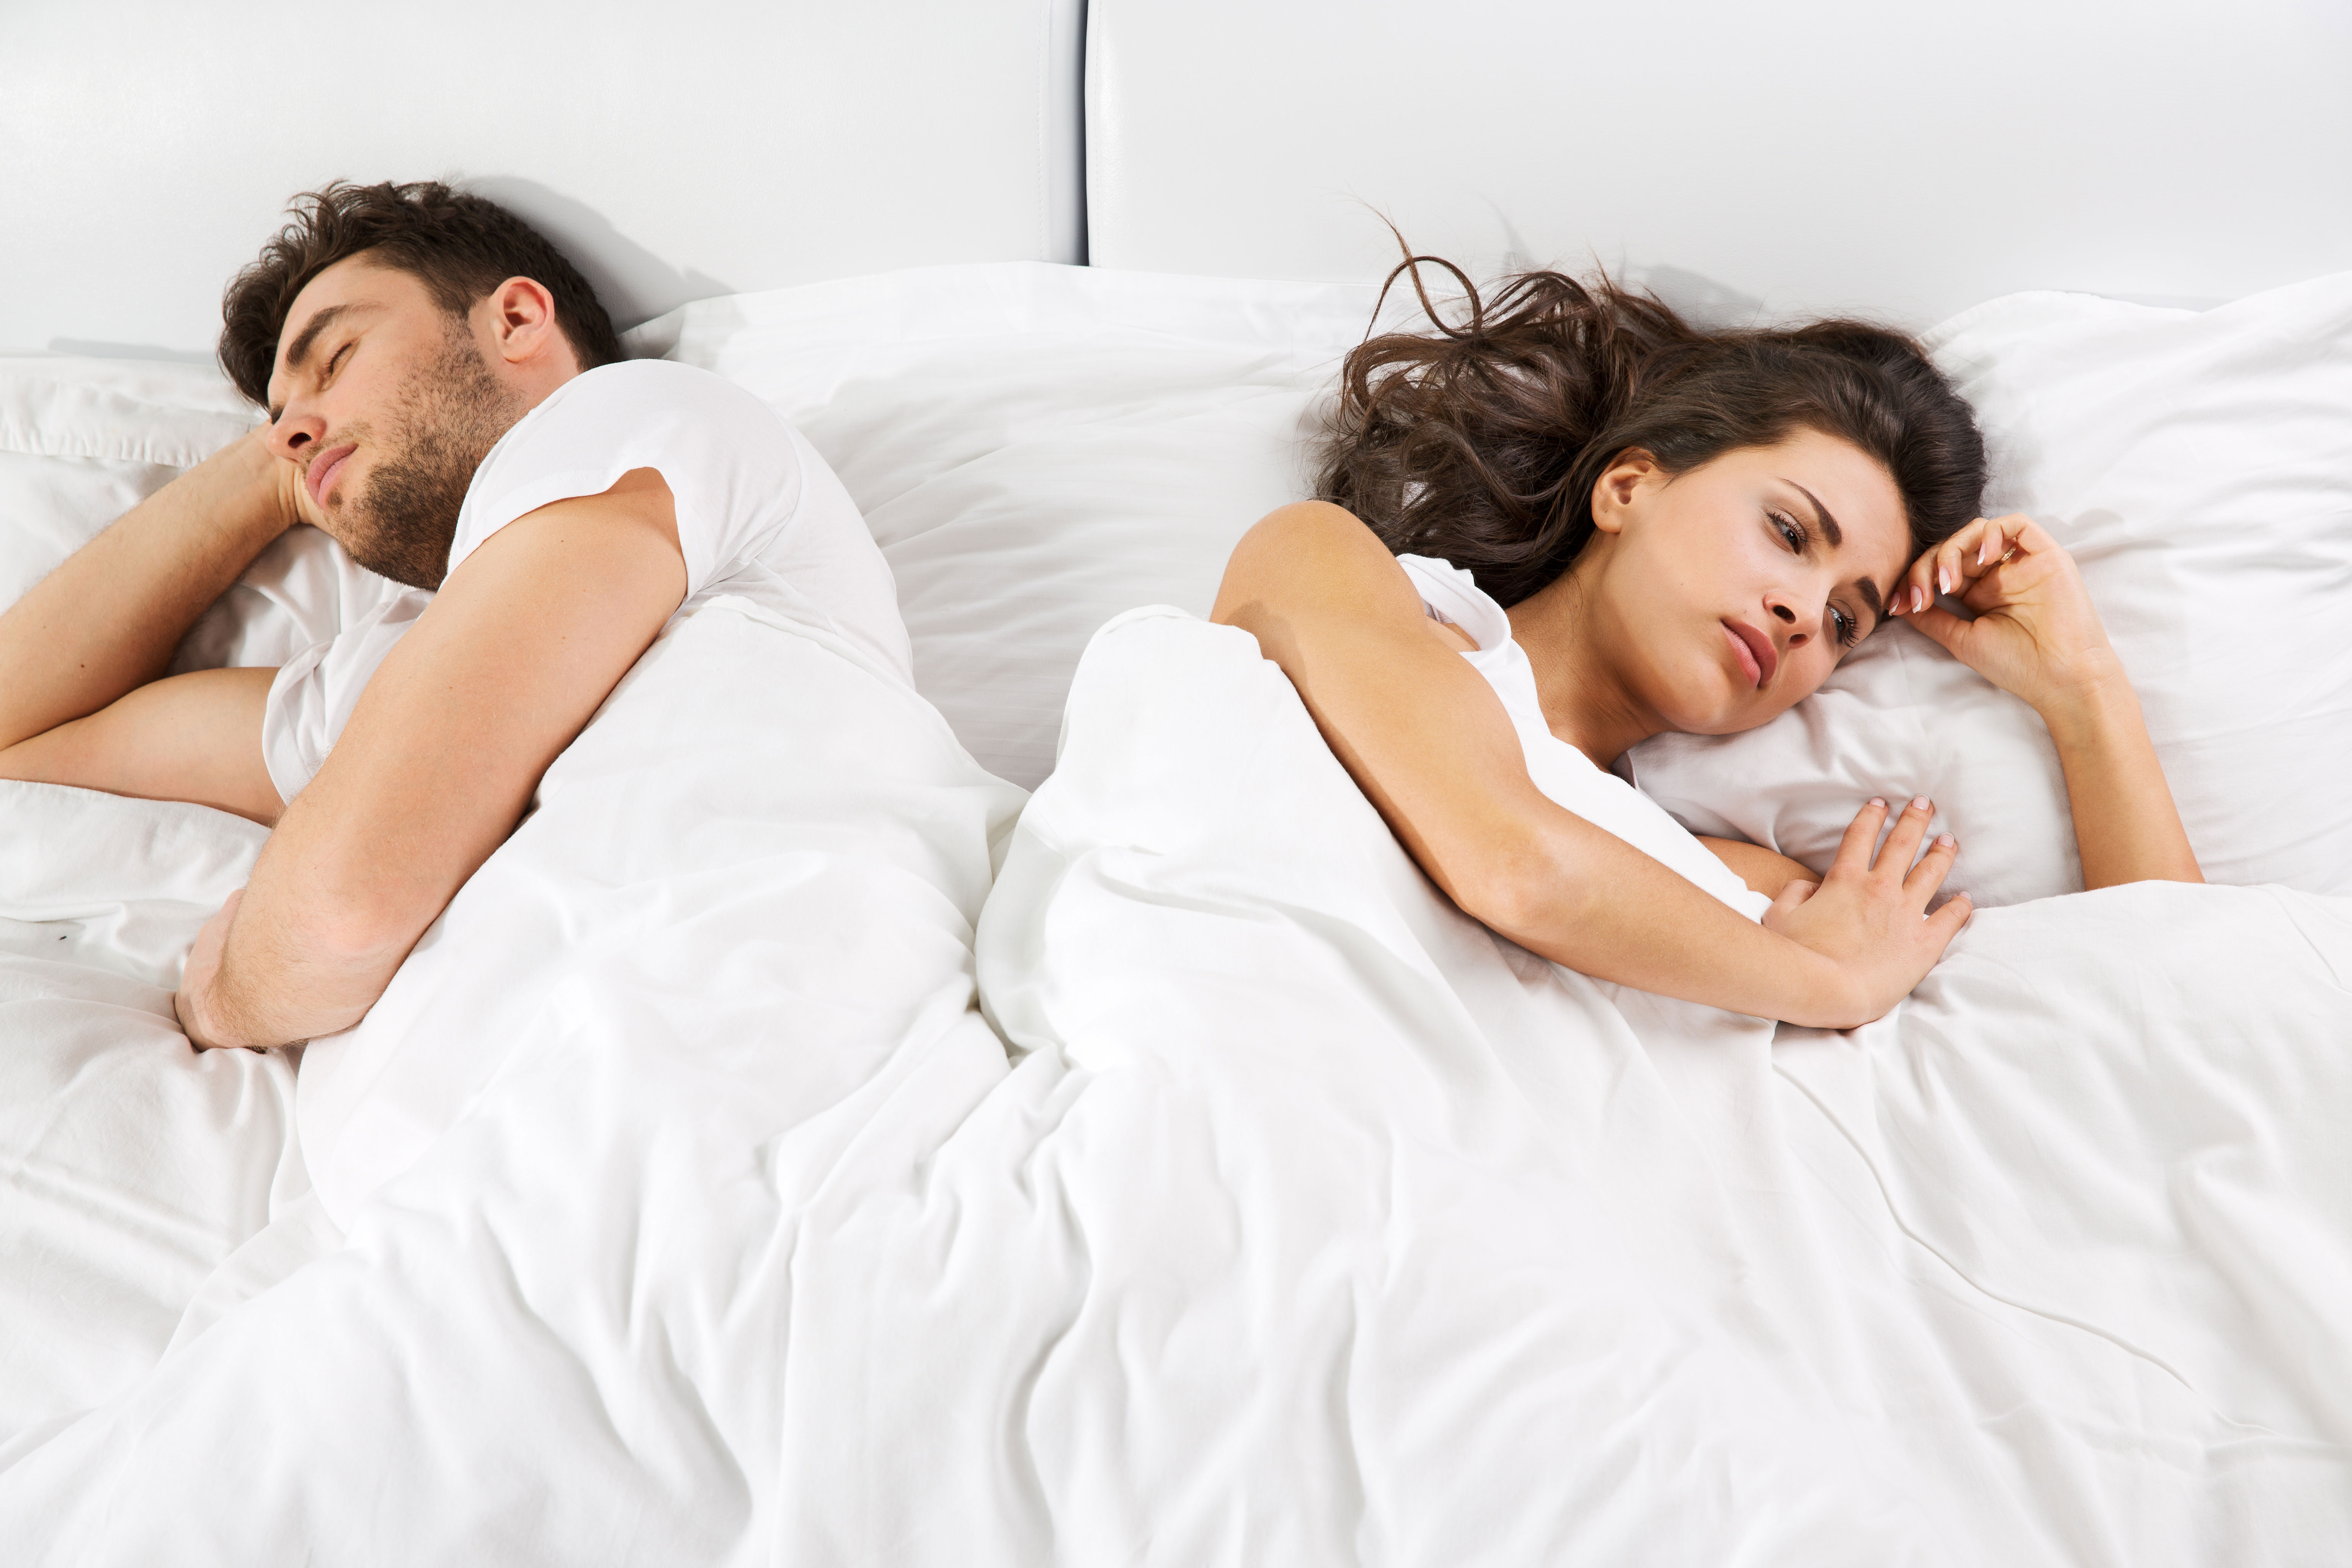 Photo: male-female couple in bed, facing opposite directions, suggesting failed intimacy